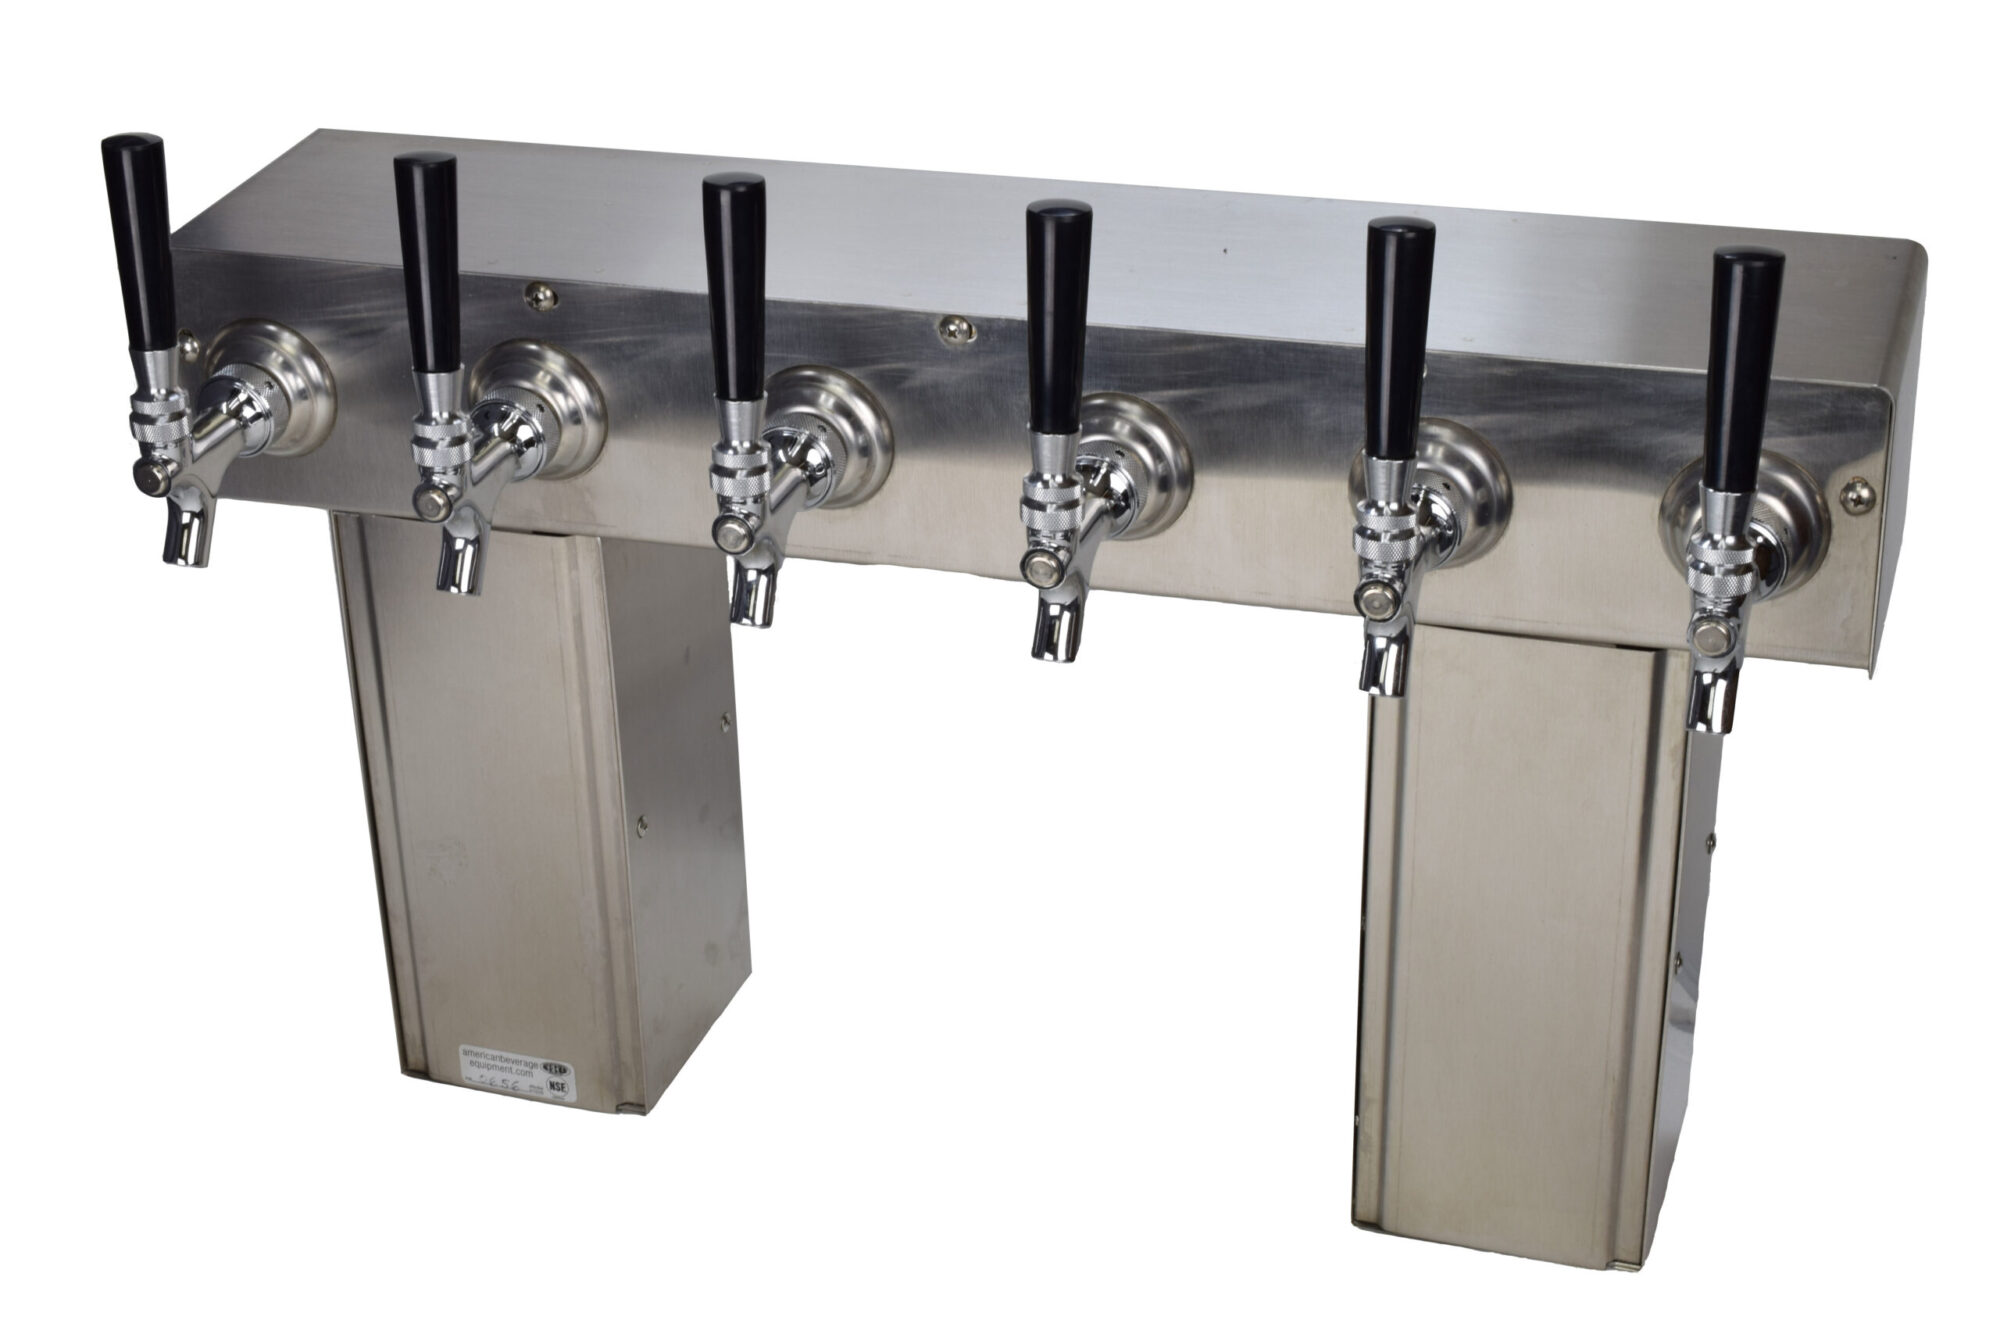 656G Six Faucet Pass Through Tower with Square Bases - Glycol Ready